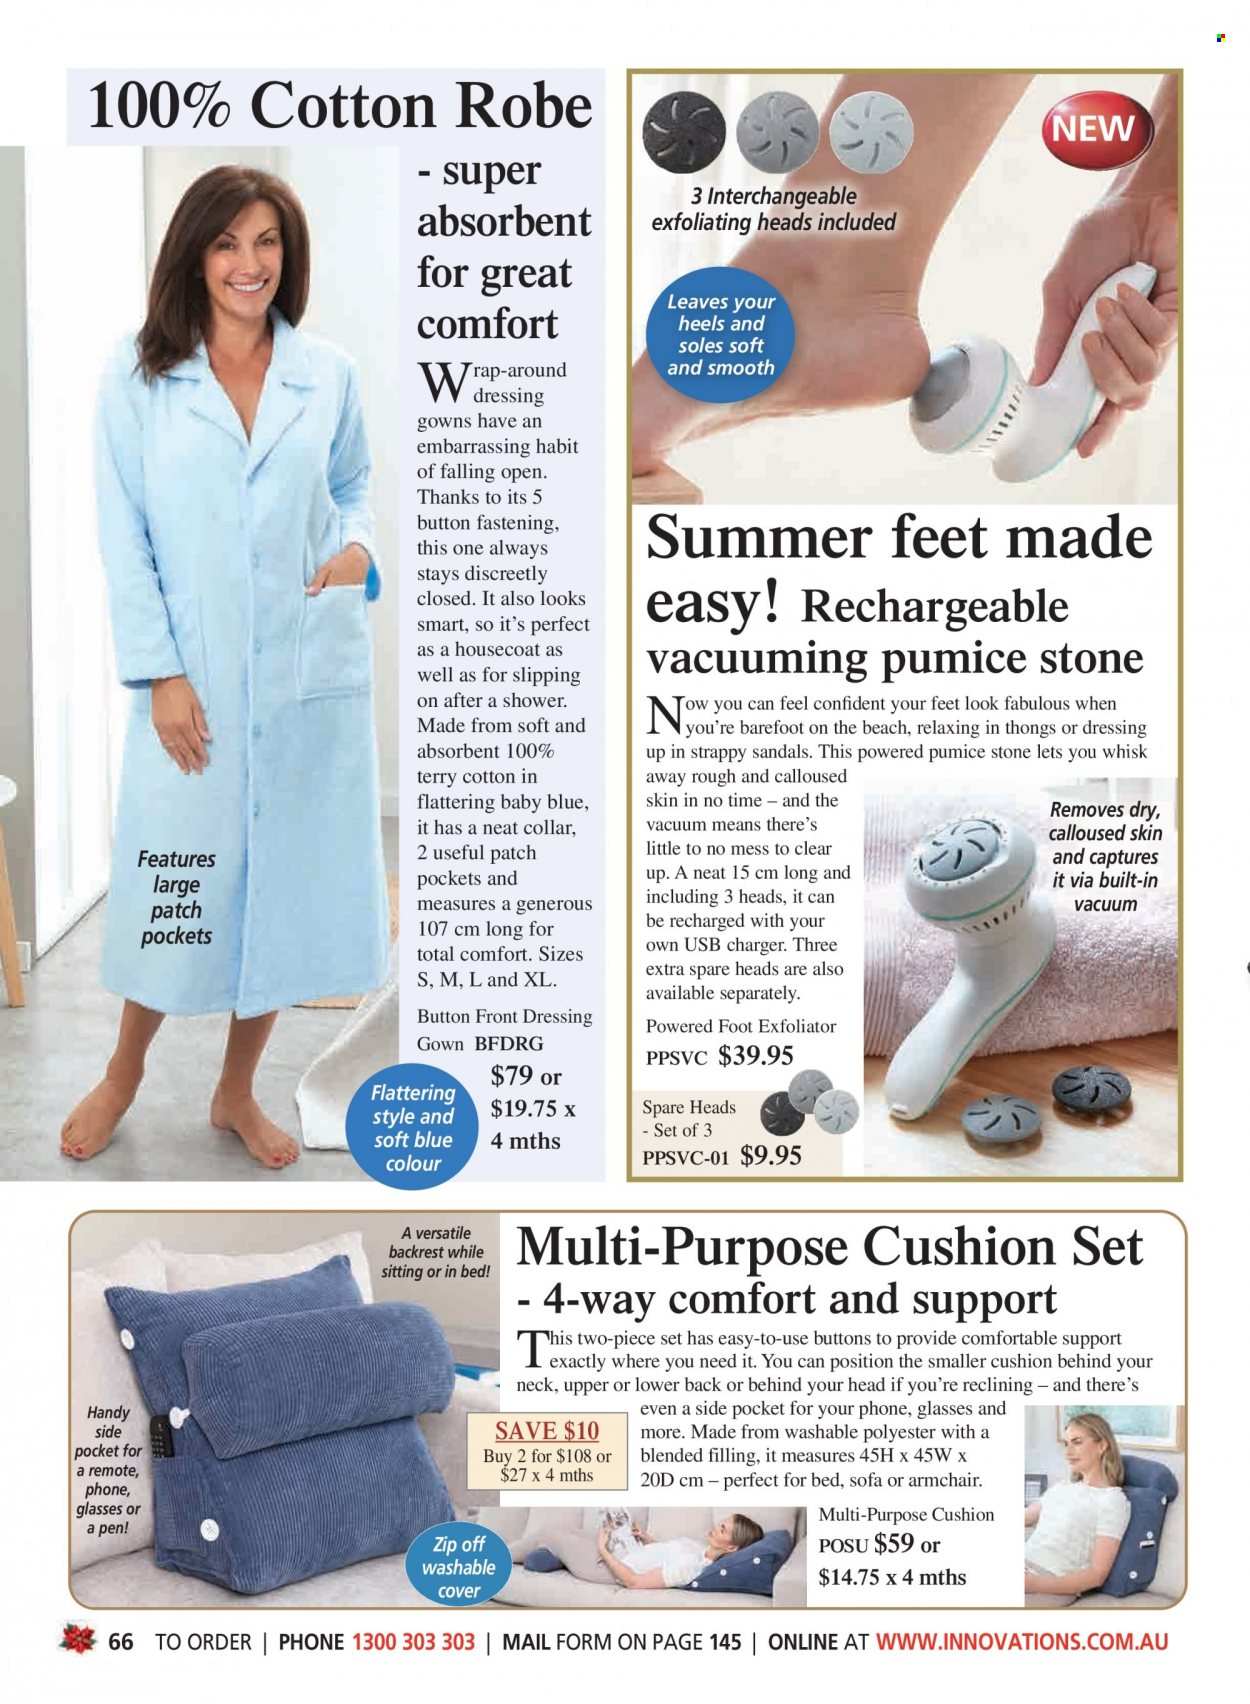 thumbnail - Innovations Catalogue - Sales products - sandals, heels, pen, cushion, USB charger, costume, robe. Page 66.